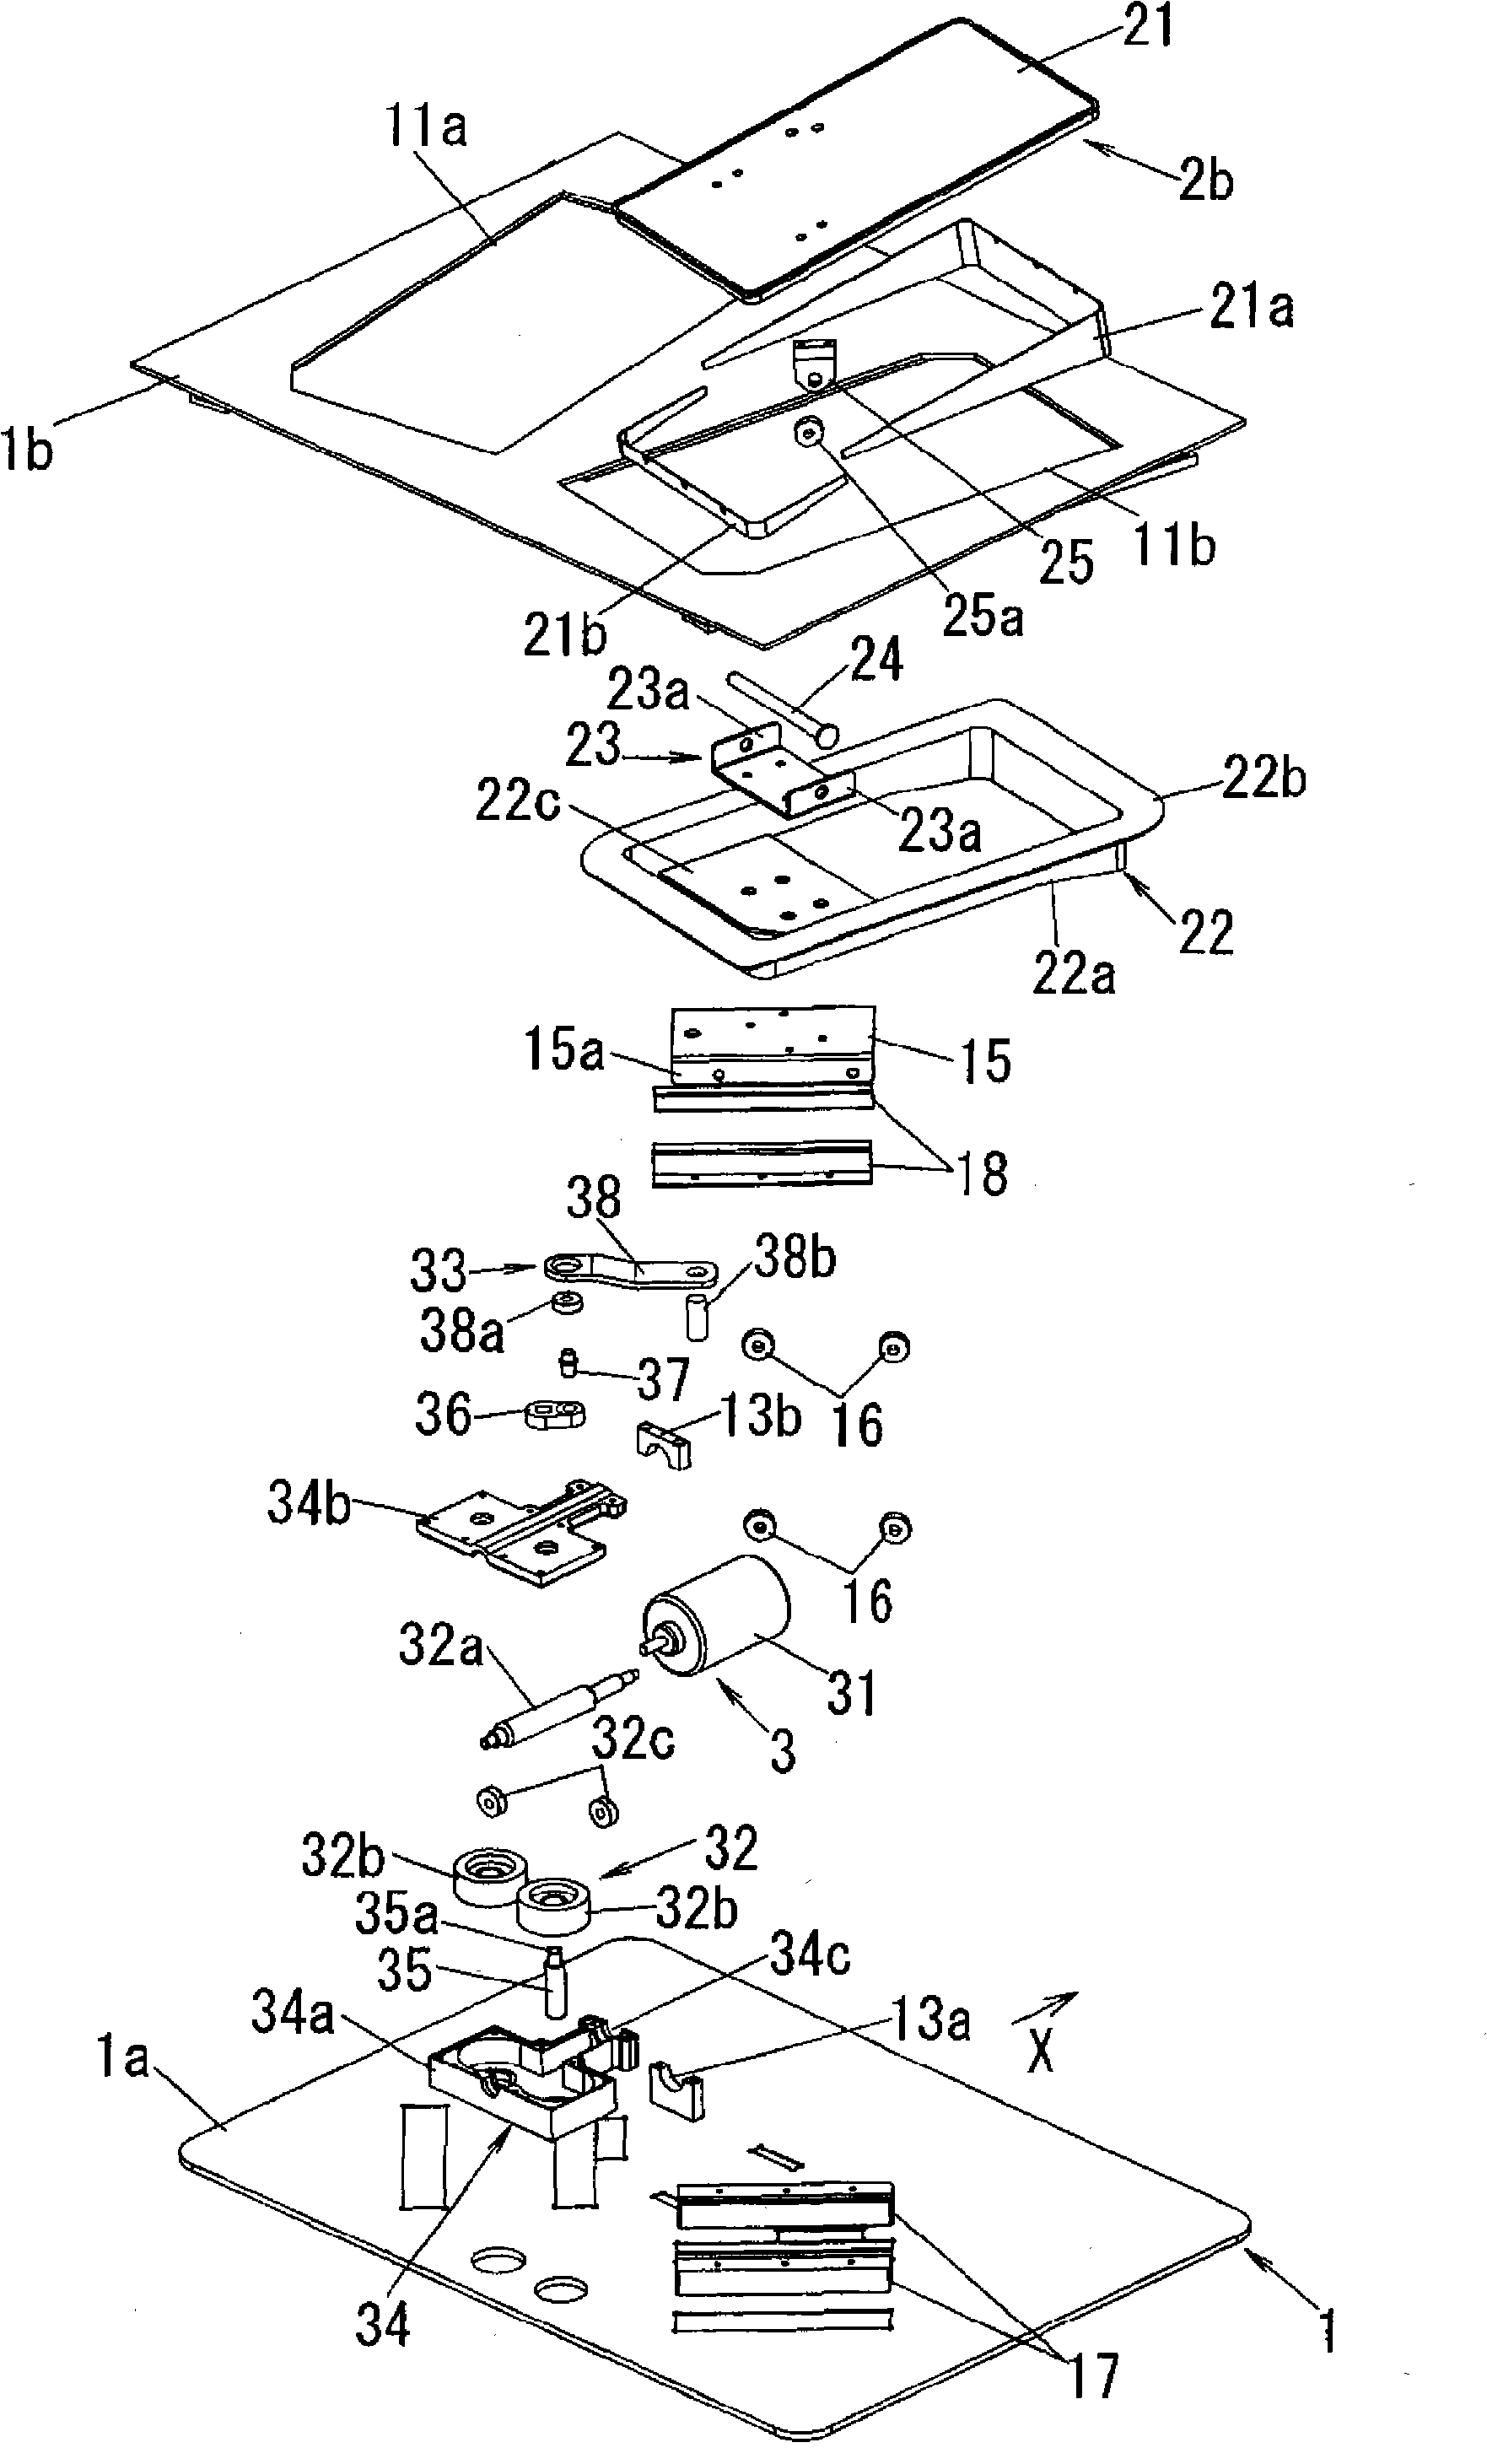 Passive motion-type exercise assistance device